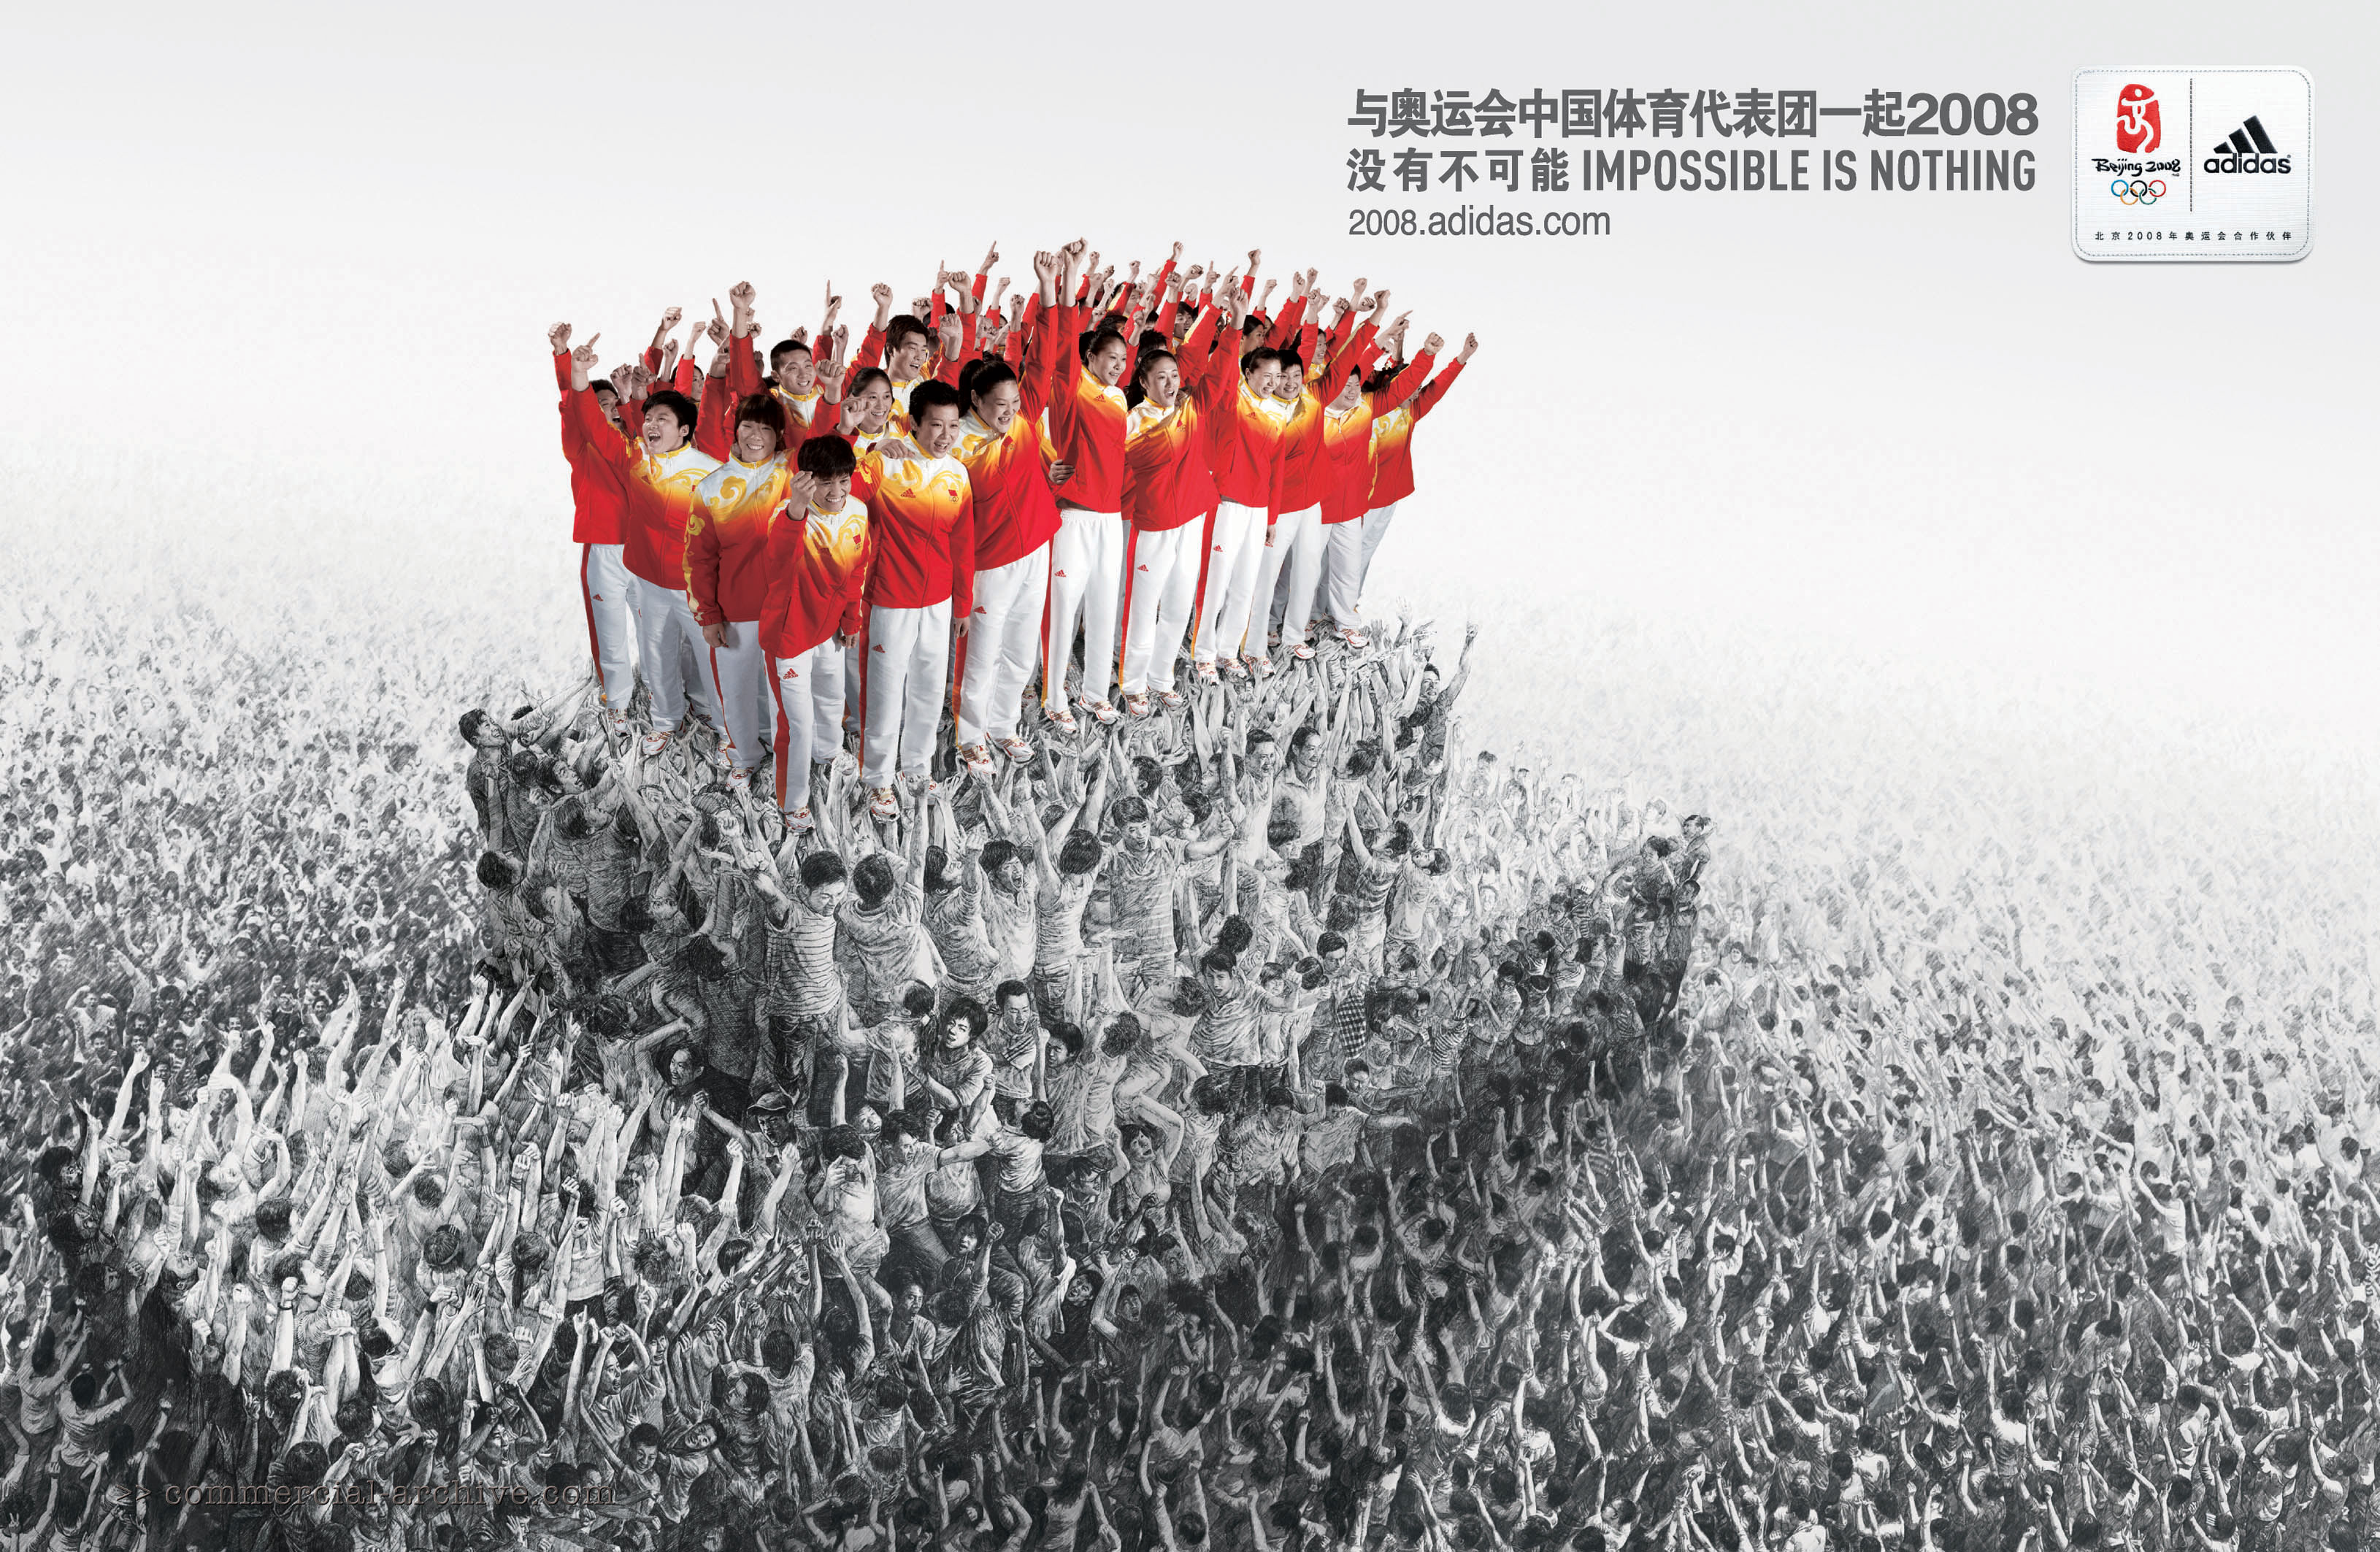 Aanpassing President Aan het liegen Adidas - Impossible is Nothing - China Olympics print campaign part 2  Adland®